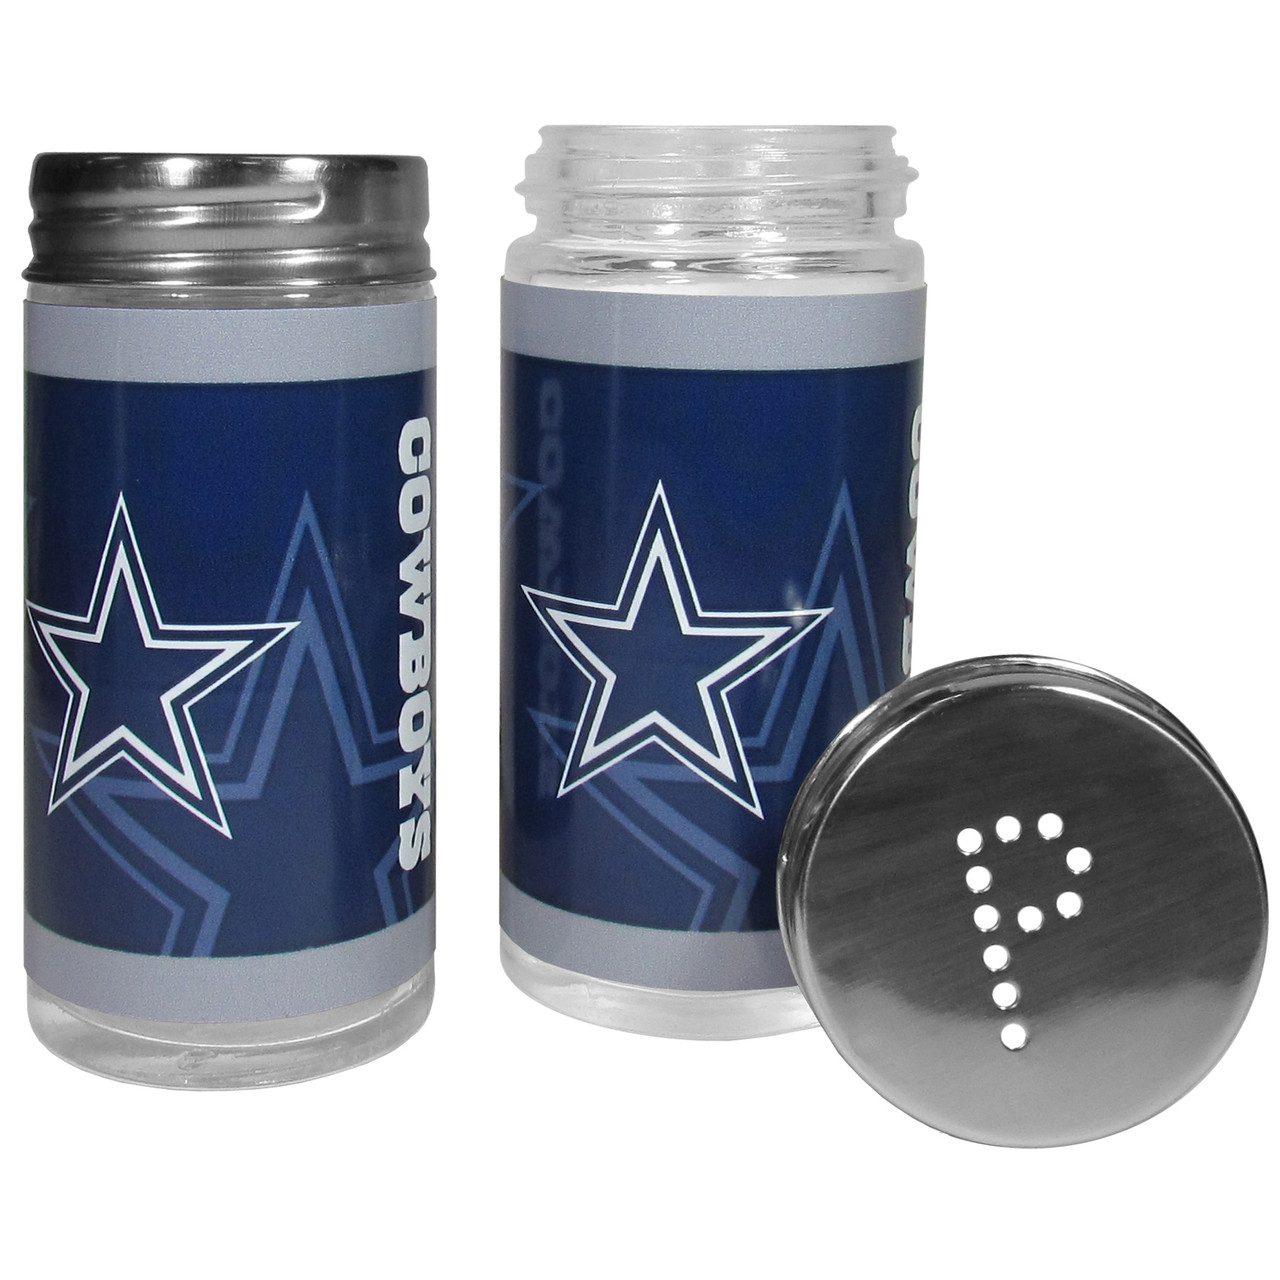 Siskiyou Dallas Cowboys Salt and Pepper Shakers Tailgater